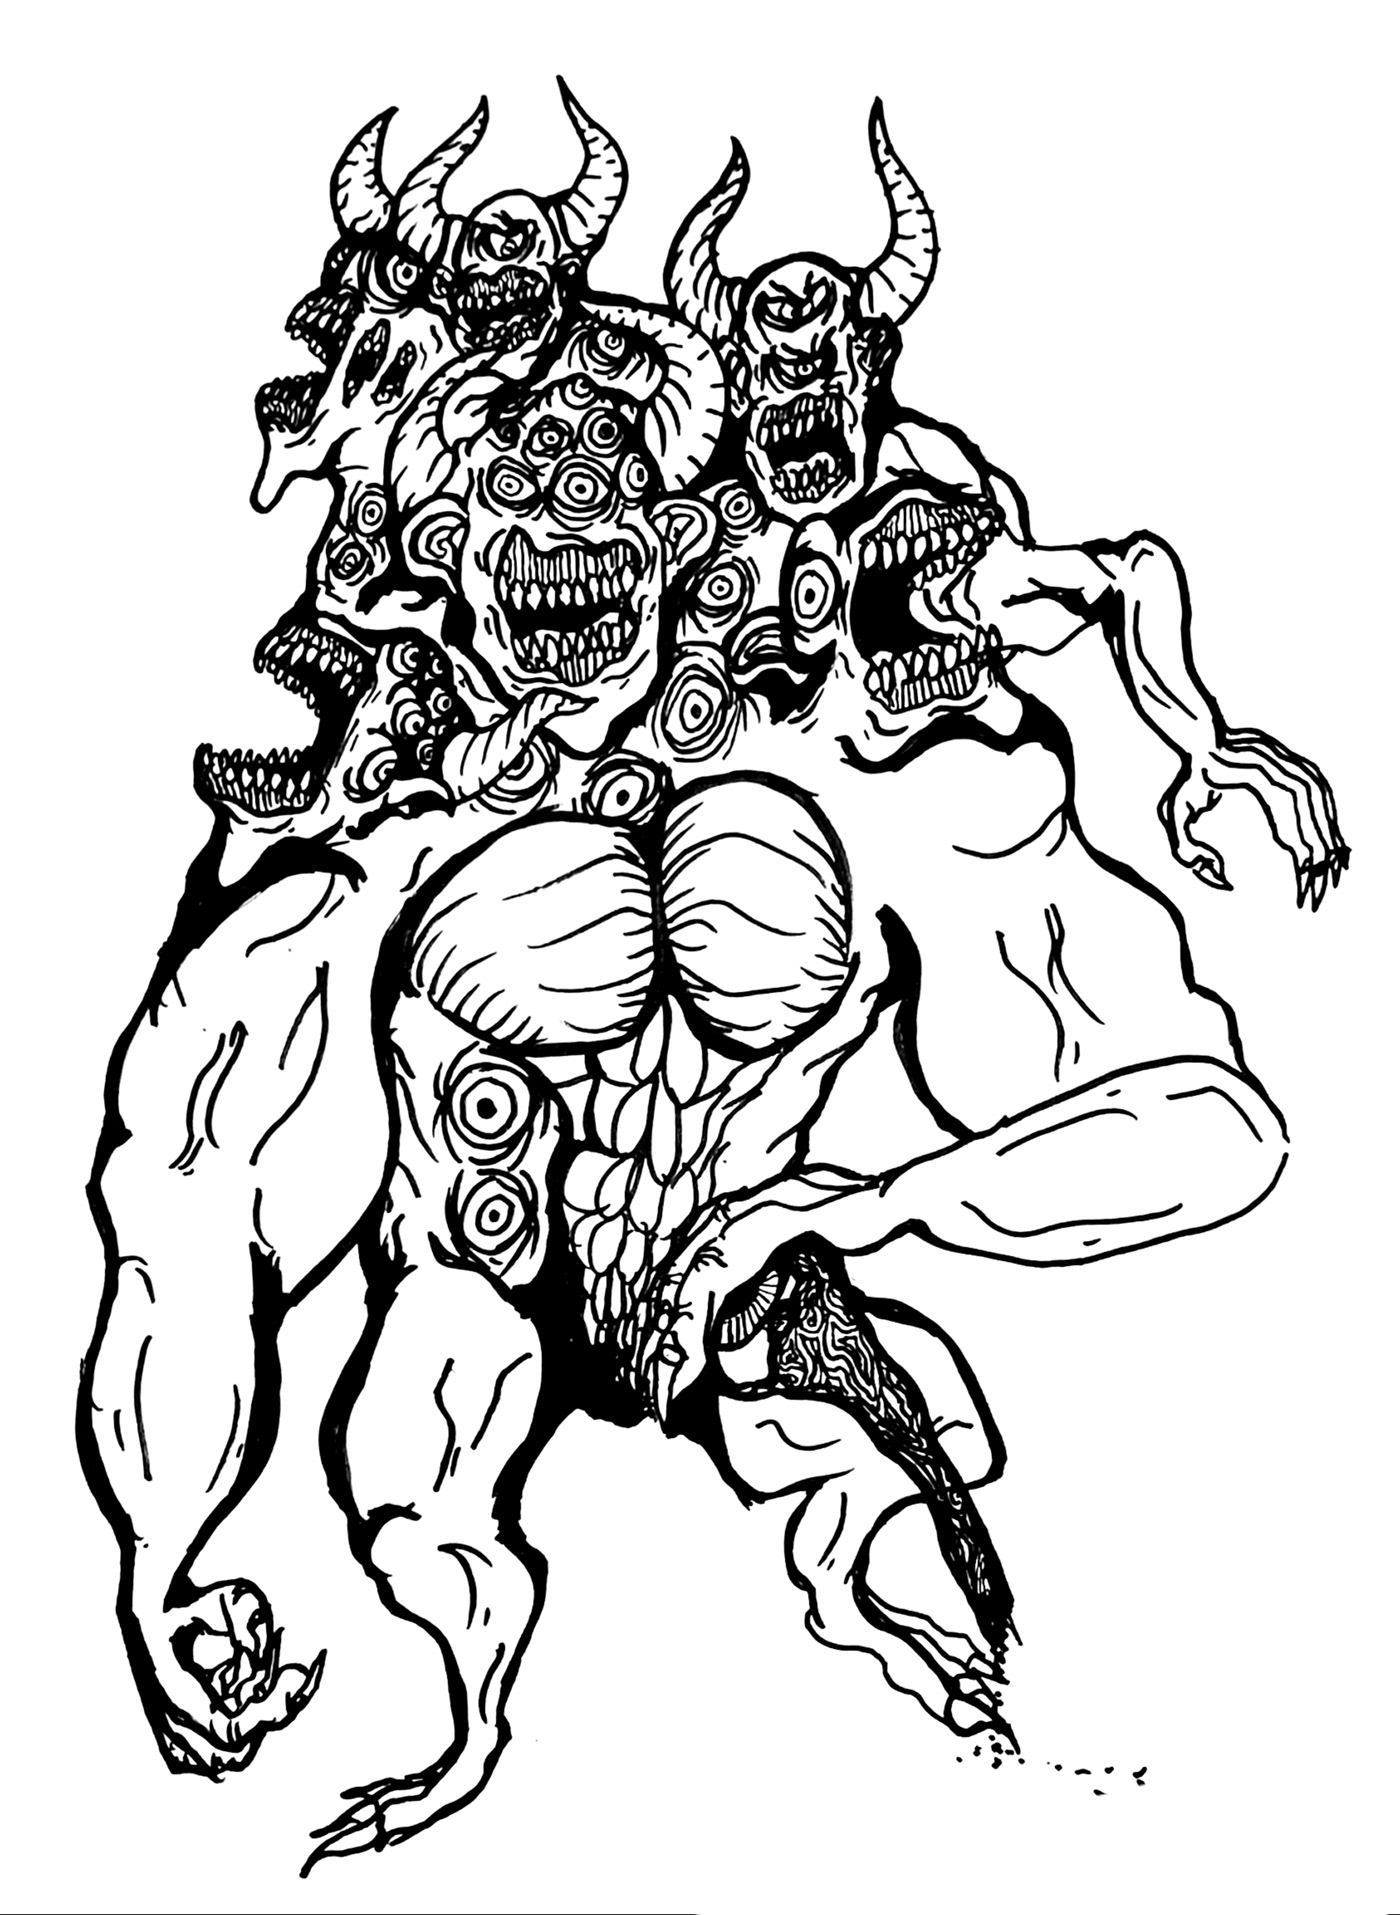 ILLUSTRATION  psychedelic black and white robbprueter robb prueter art Drawing  monsters creatures